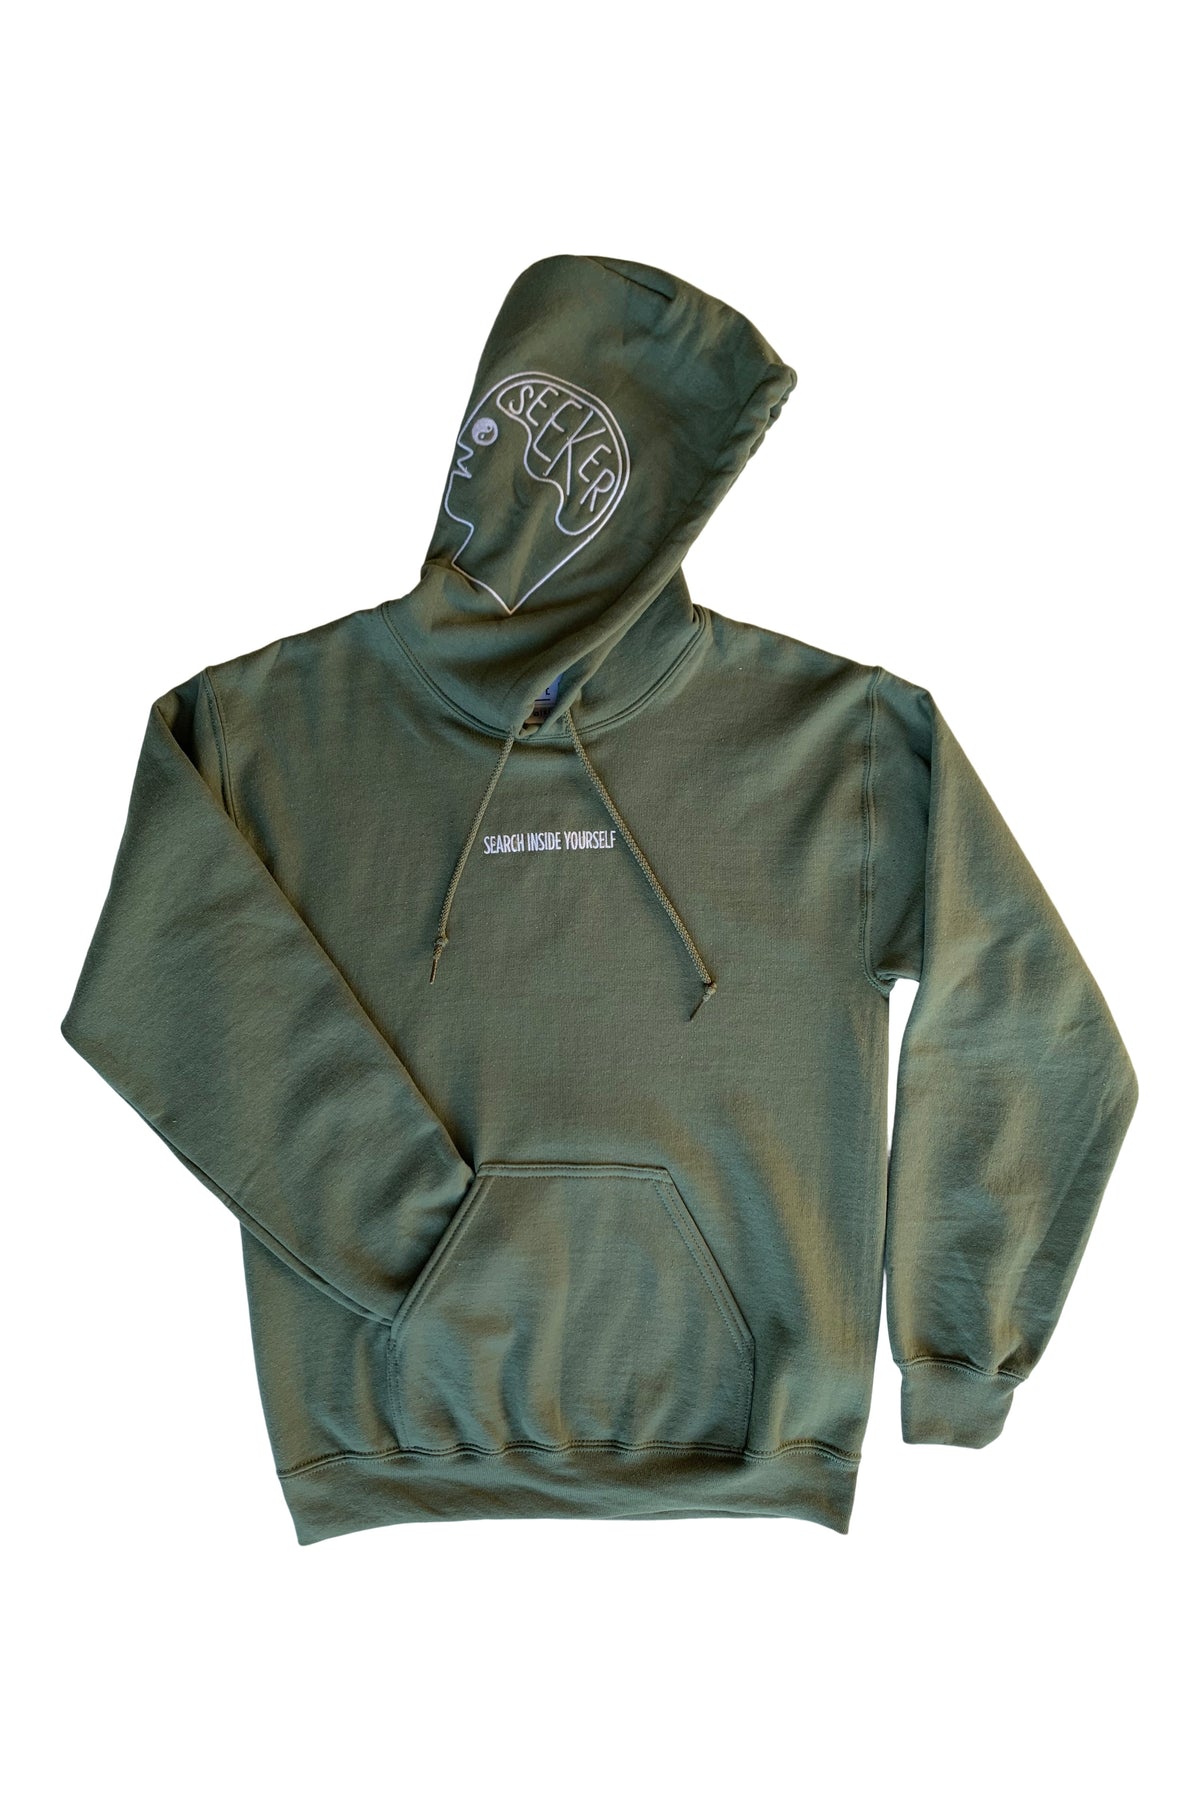 Search Inside Yourself Hoodie